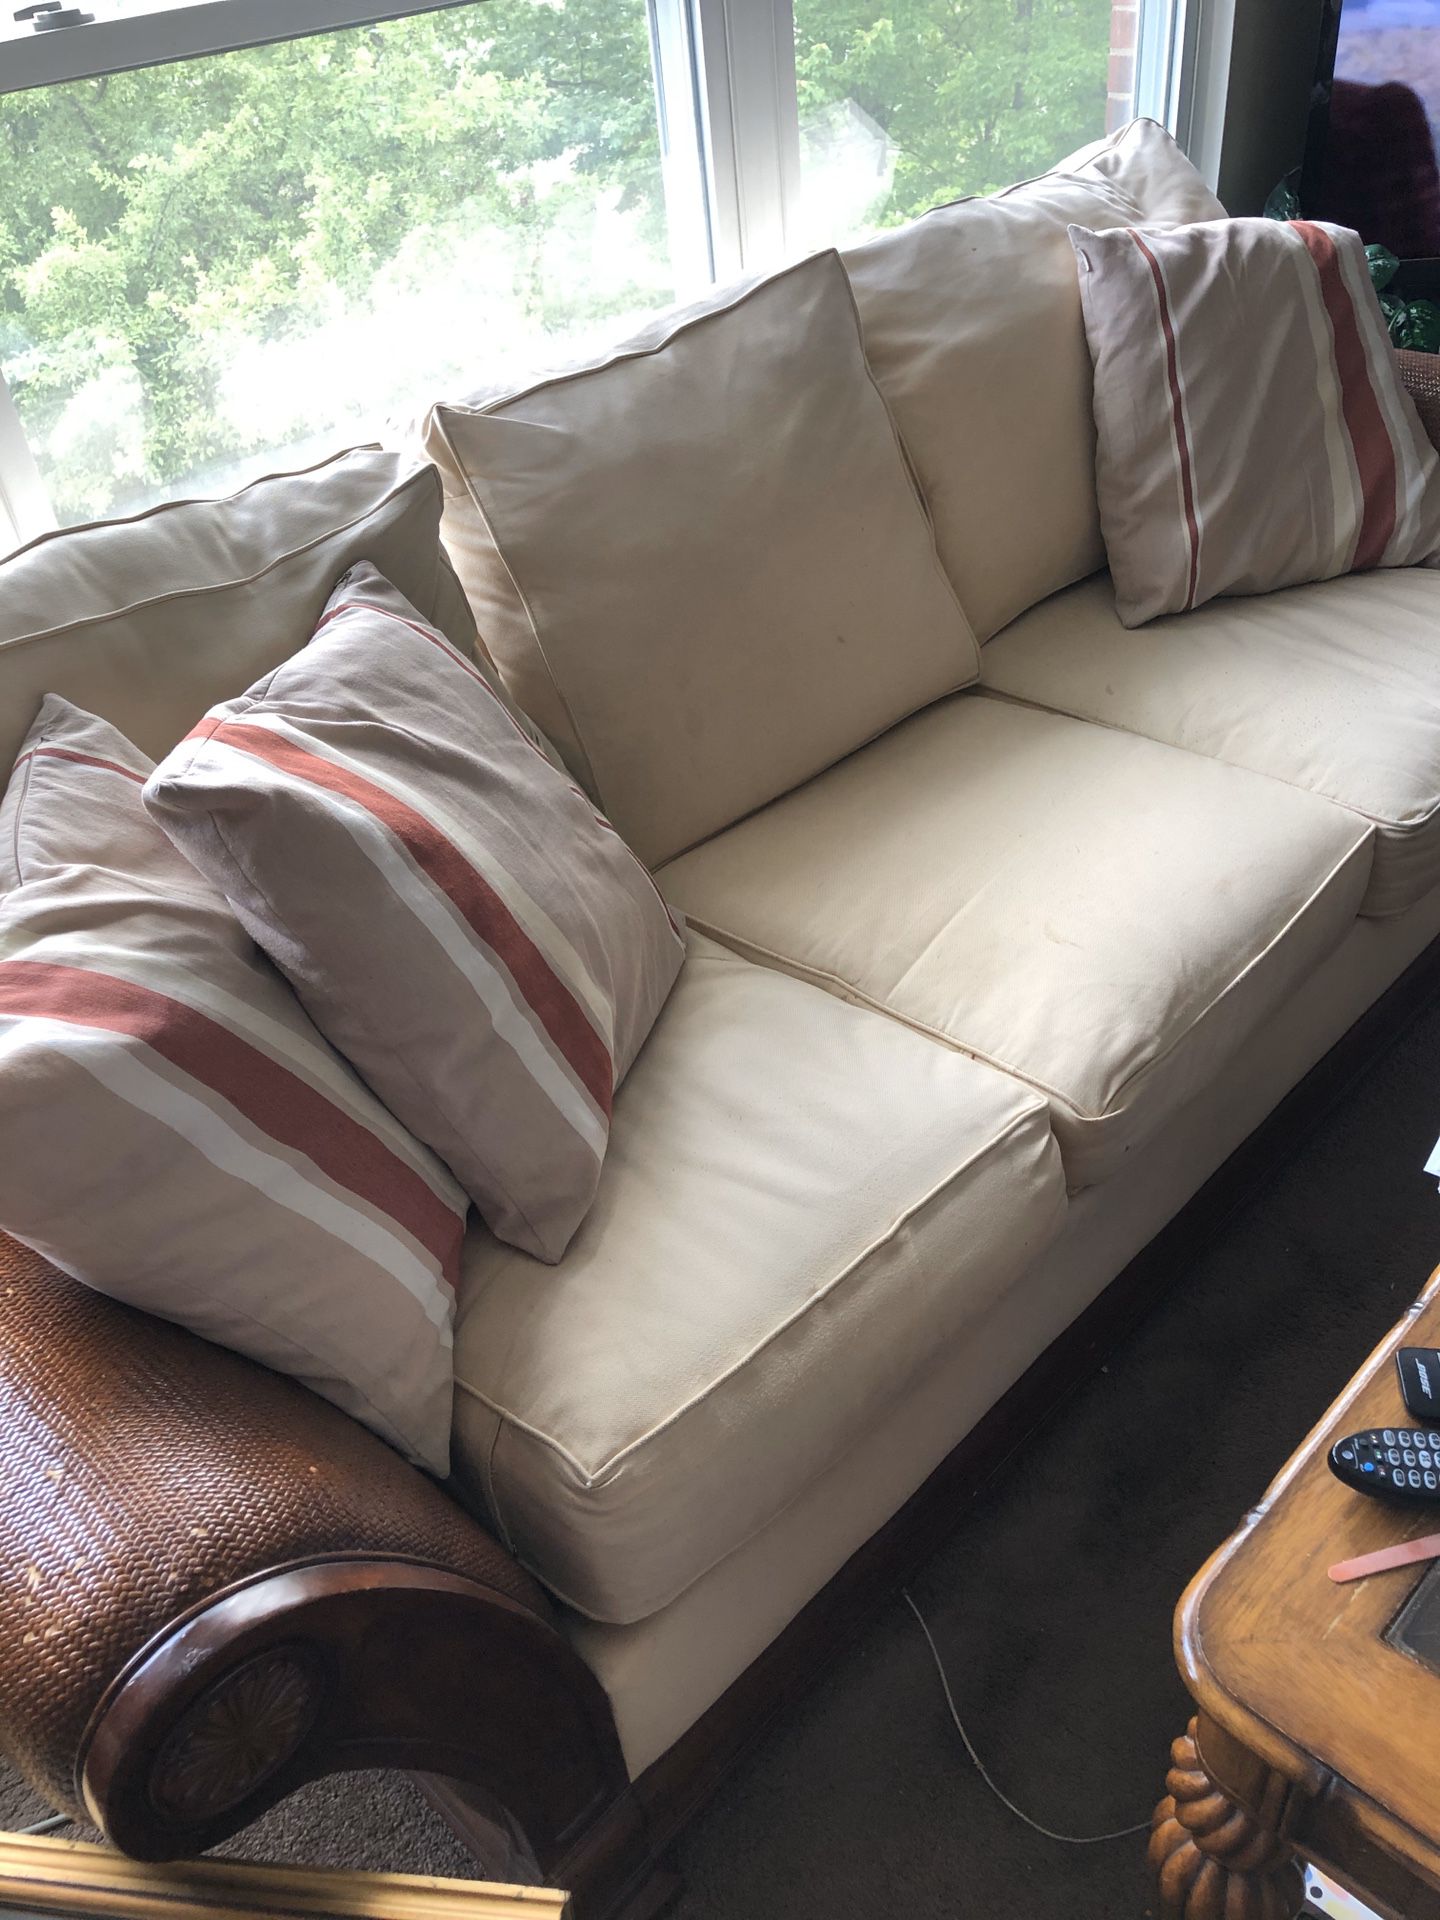 FREE furniture! Moving out of state and need to find a new home for this furniture.